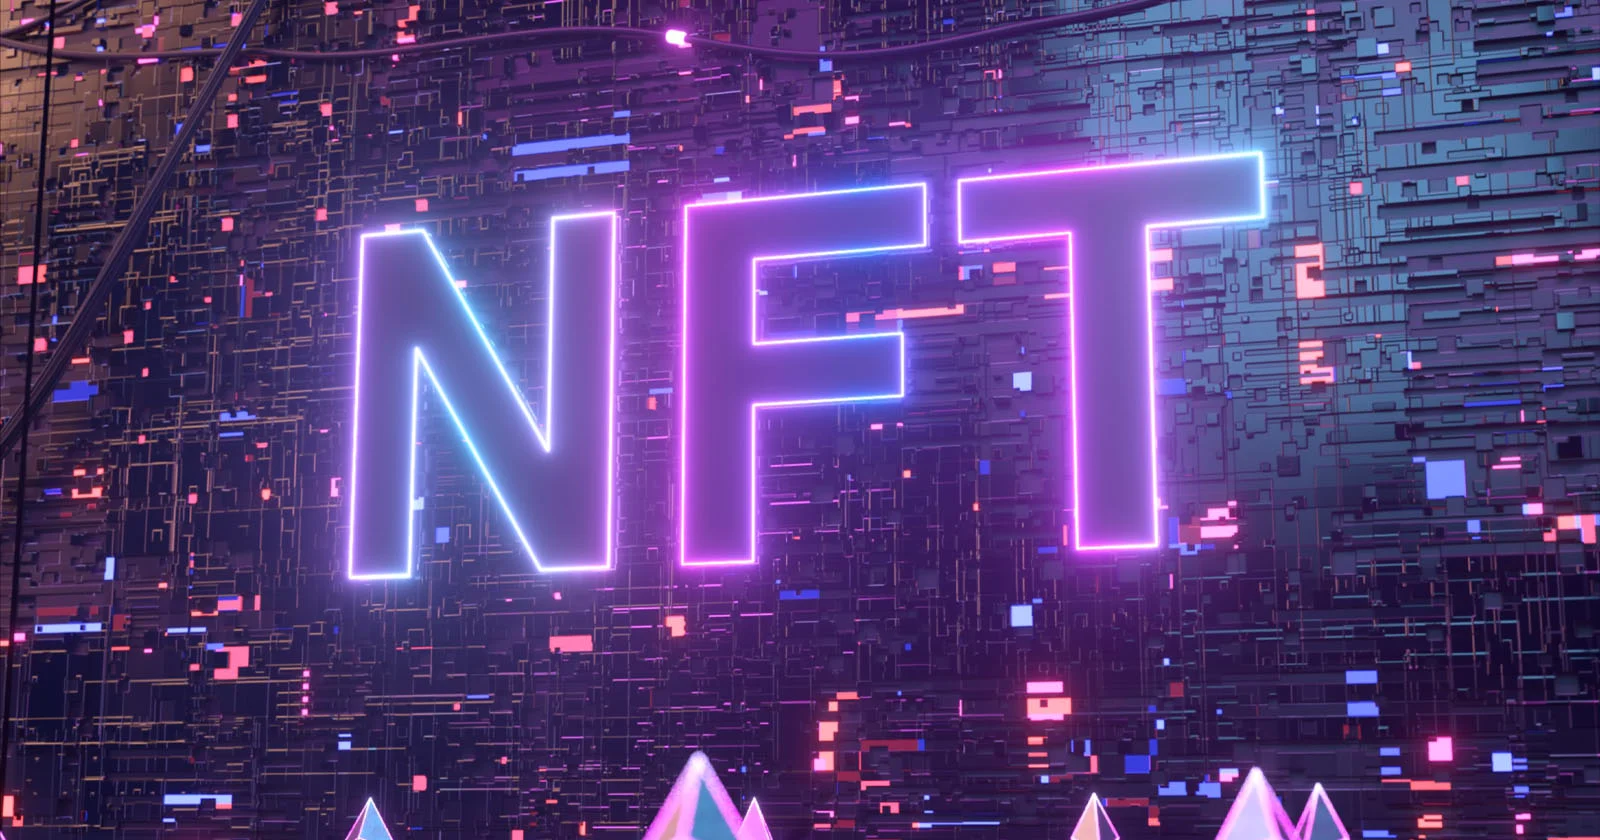 "NFT" written on a computer's motherboard in neon colors.